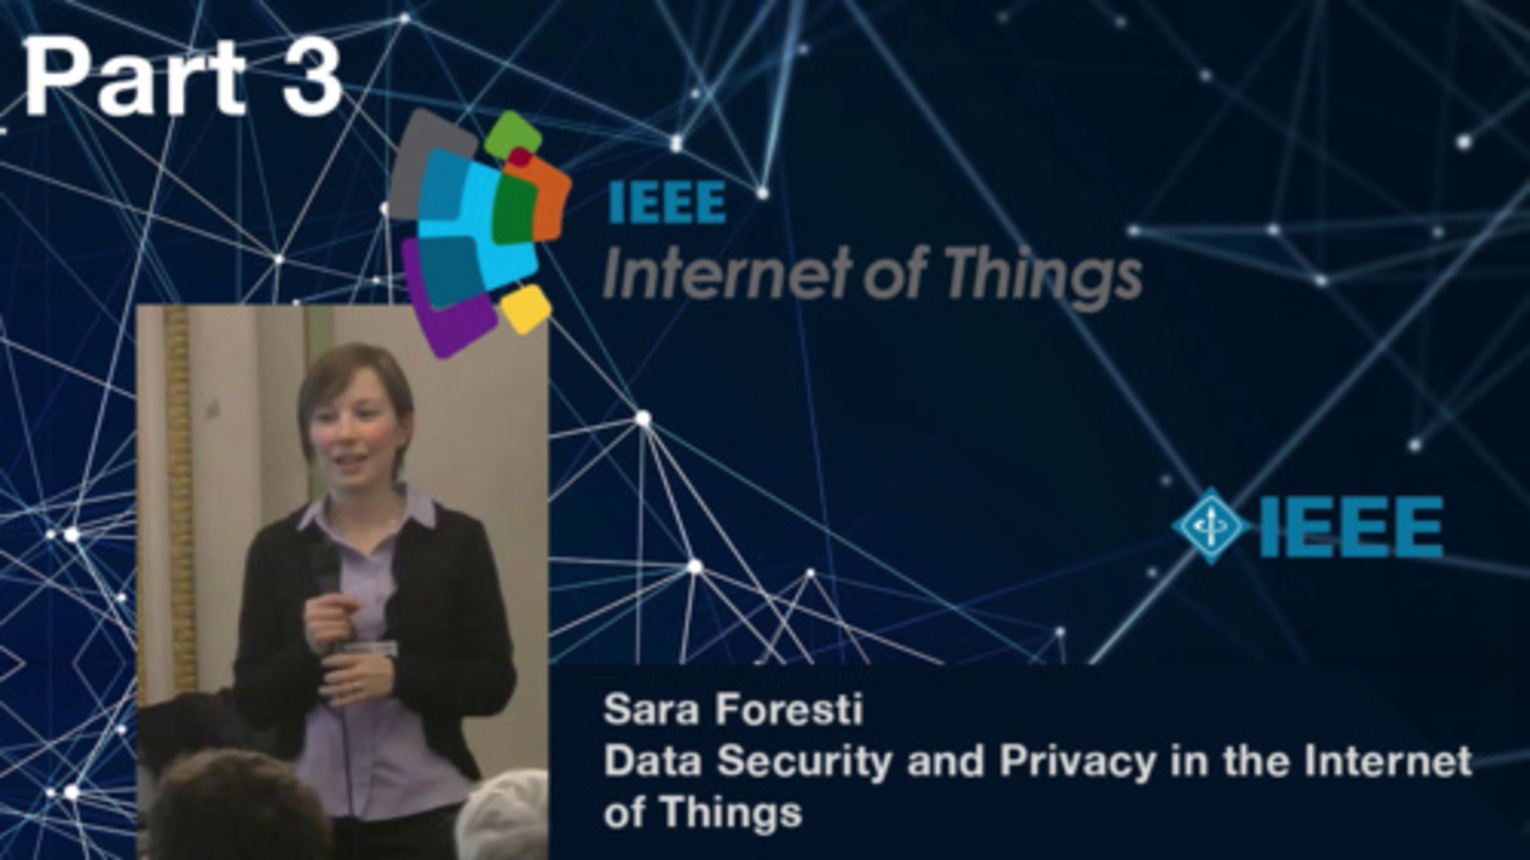 Part 3: Data Security and Privacy in the Internet of Things - Sara Foresti, IEEE WF-IoT 2015